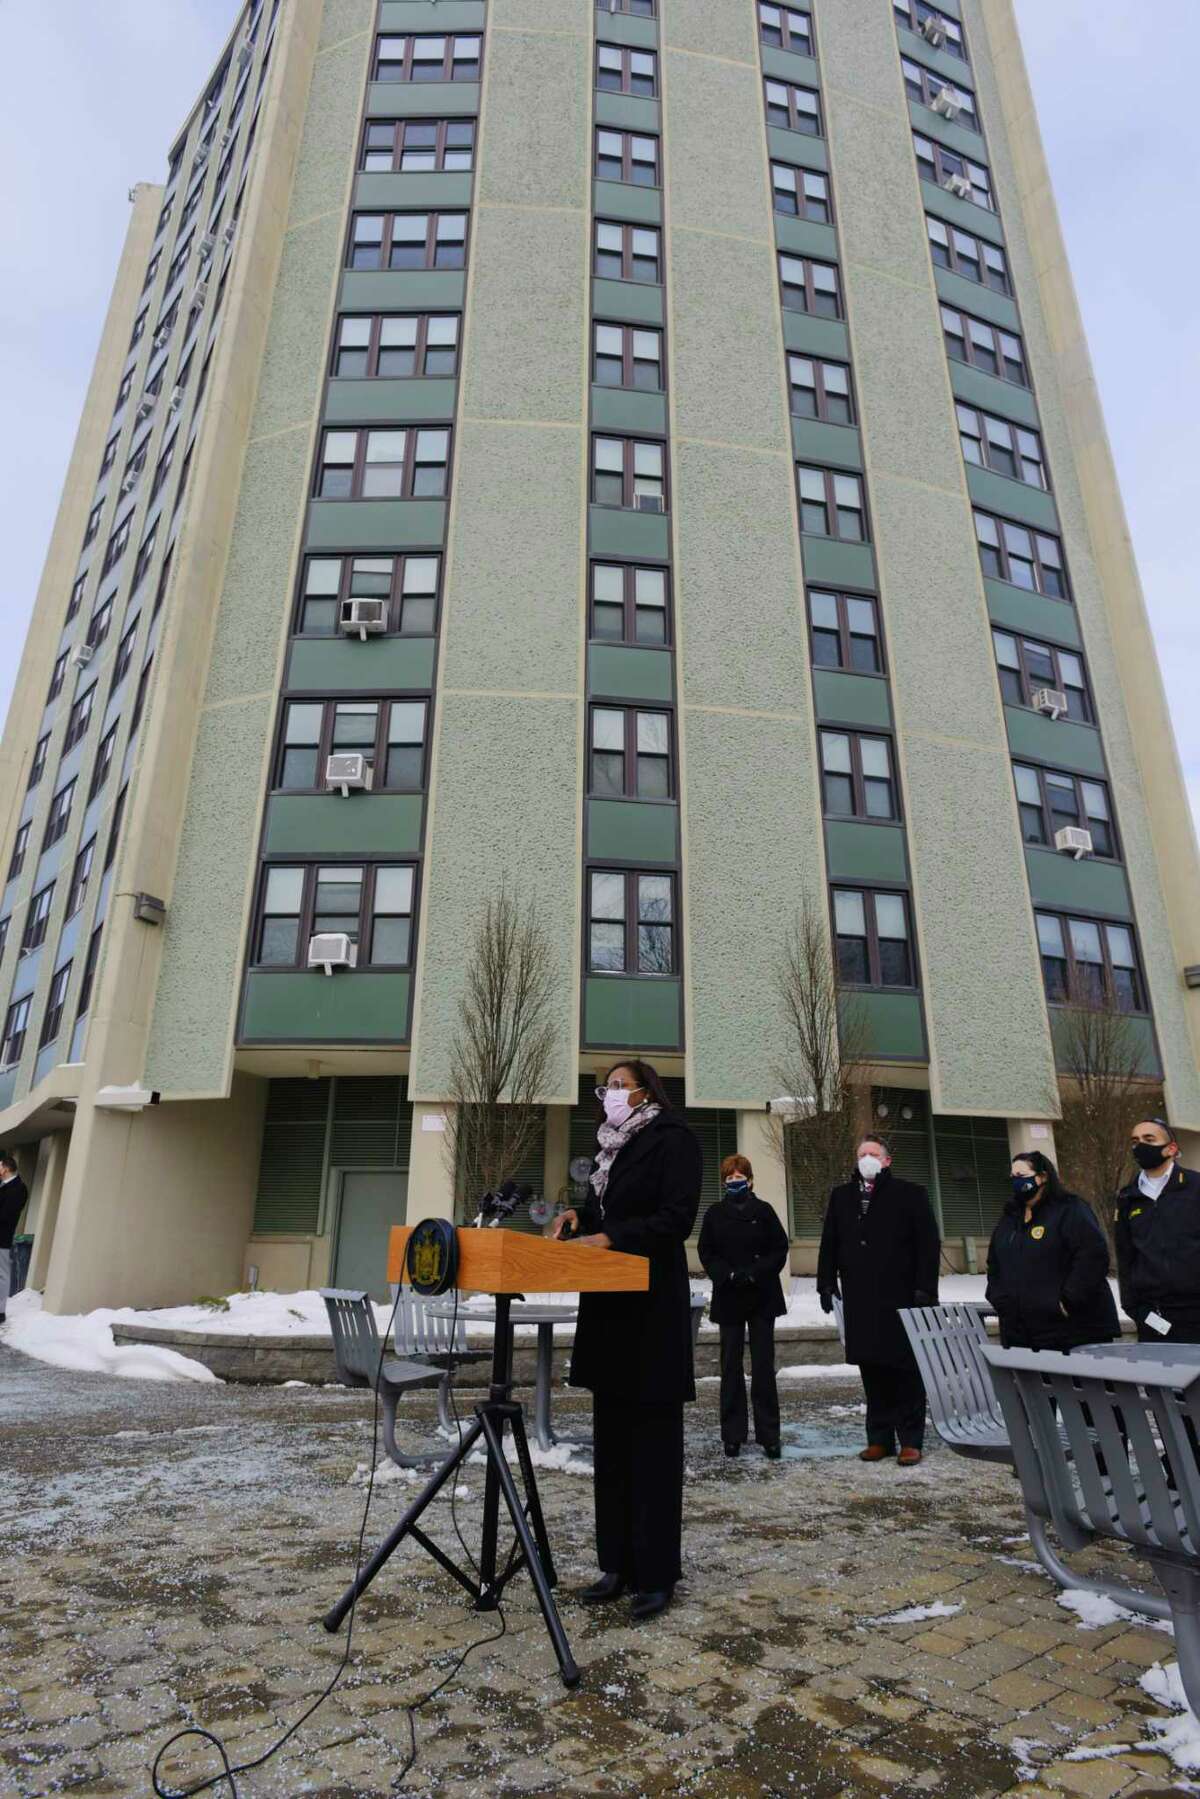 Chiquita Darbeau, Albany Housing Authority executive director, speaks at a press conference outside the Westview Homes where Mohawk Ambulance Services was running a community based pop up vaccination site on Thursday, Feb. 4, 2021, in Albany, N.Y. (Paul Buckowski/Times Union)